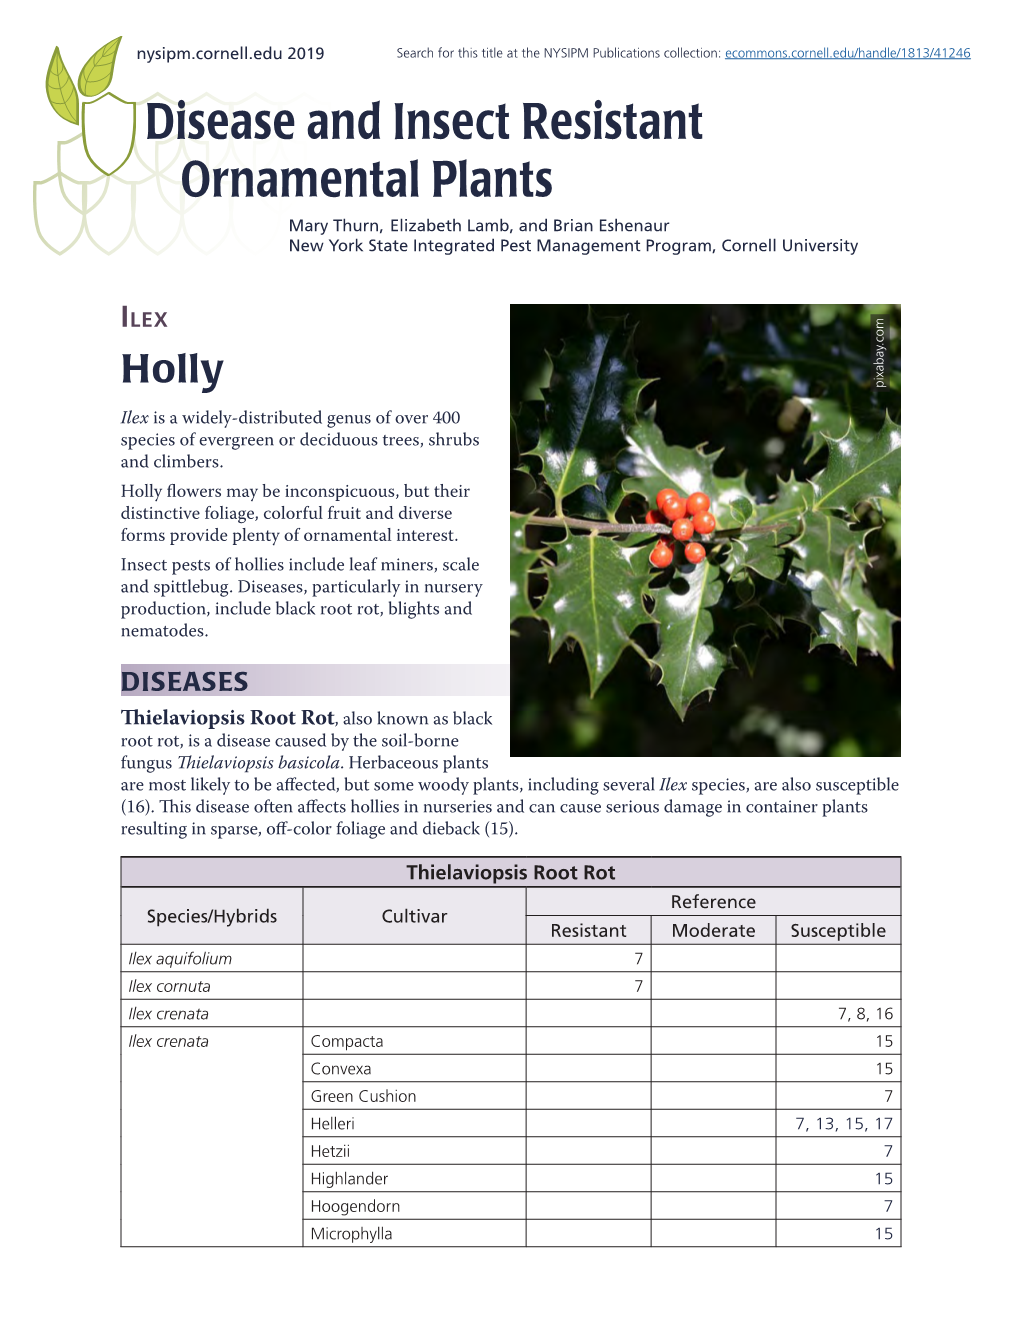 Disease and Insect Resistant Ornamental Plants: Ilex (Holly)